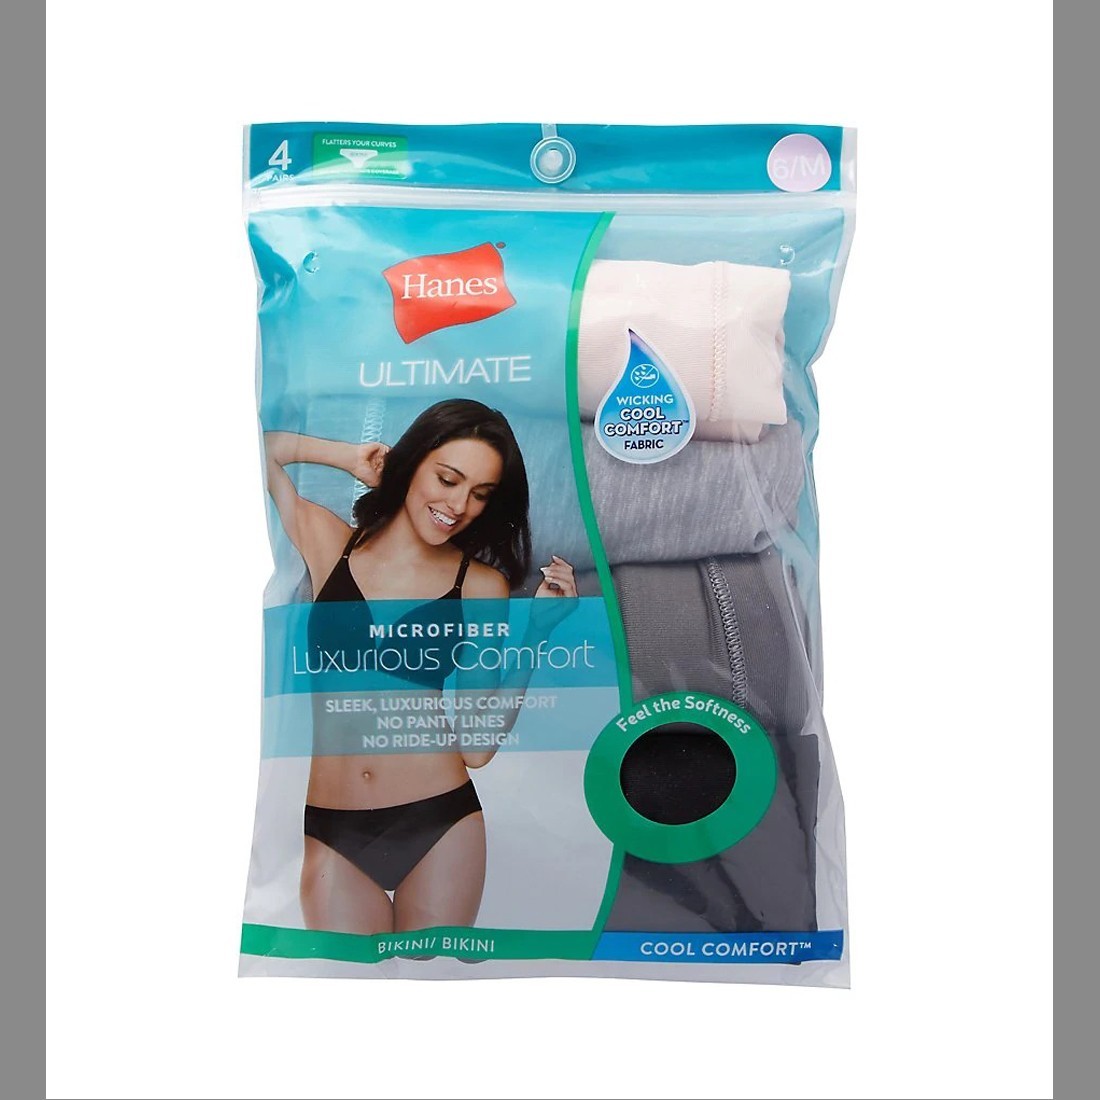 Shop Hanes HXMFBK ULTIMATE X-TEMP MICR L BUFF/SIL SH - Hanes, delivered to  your home